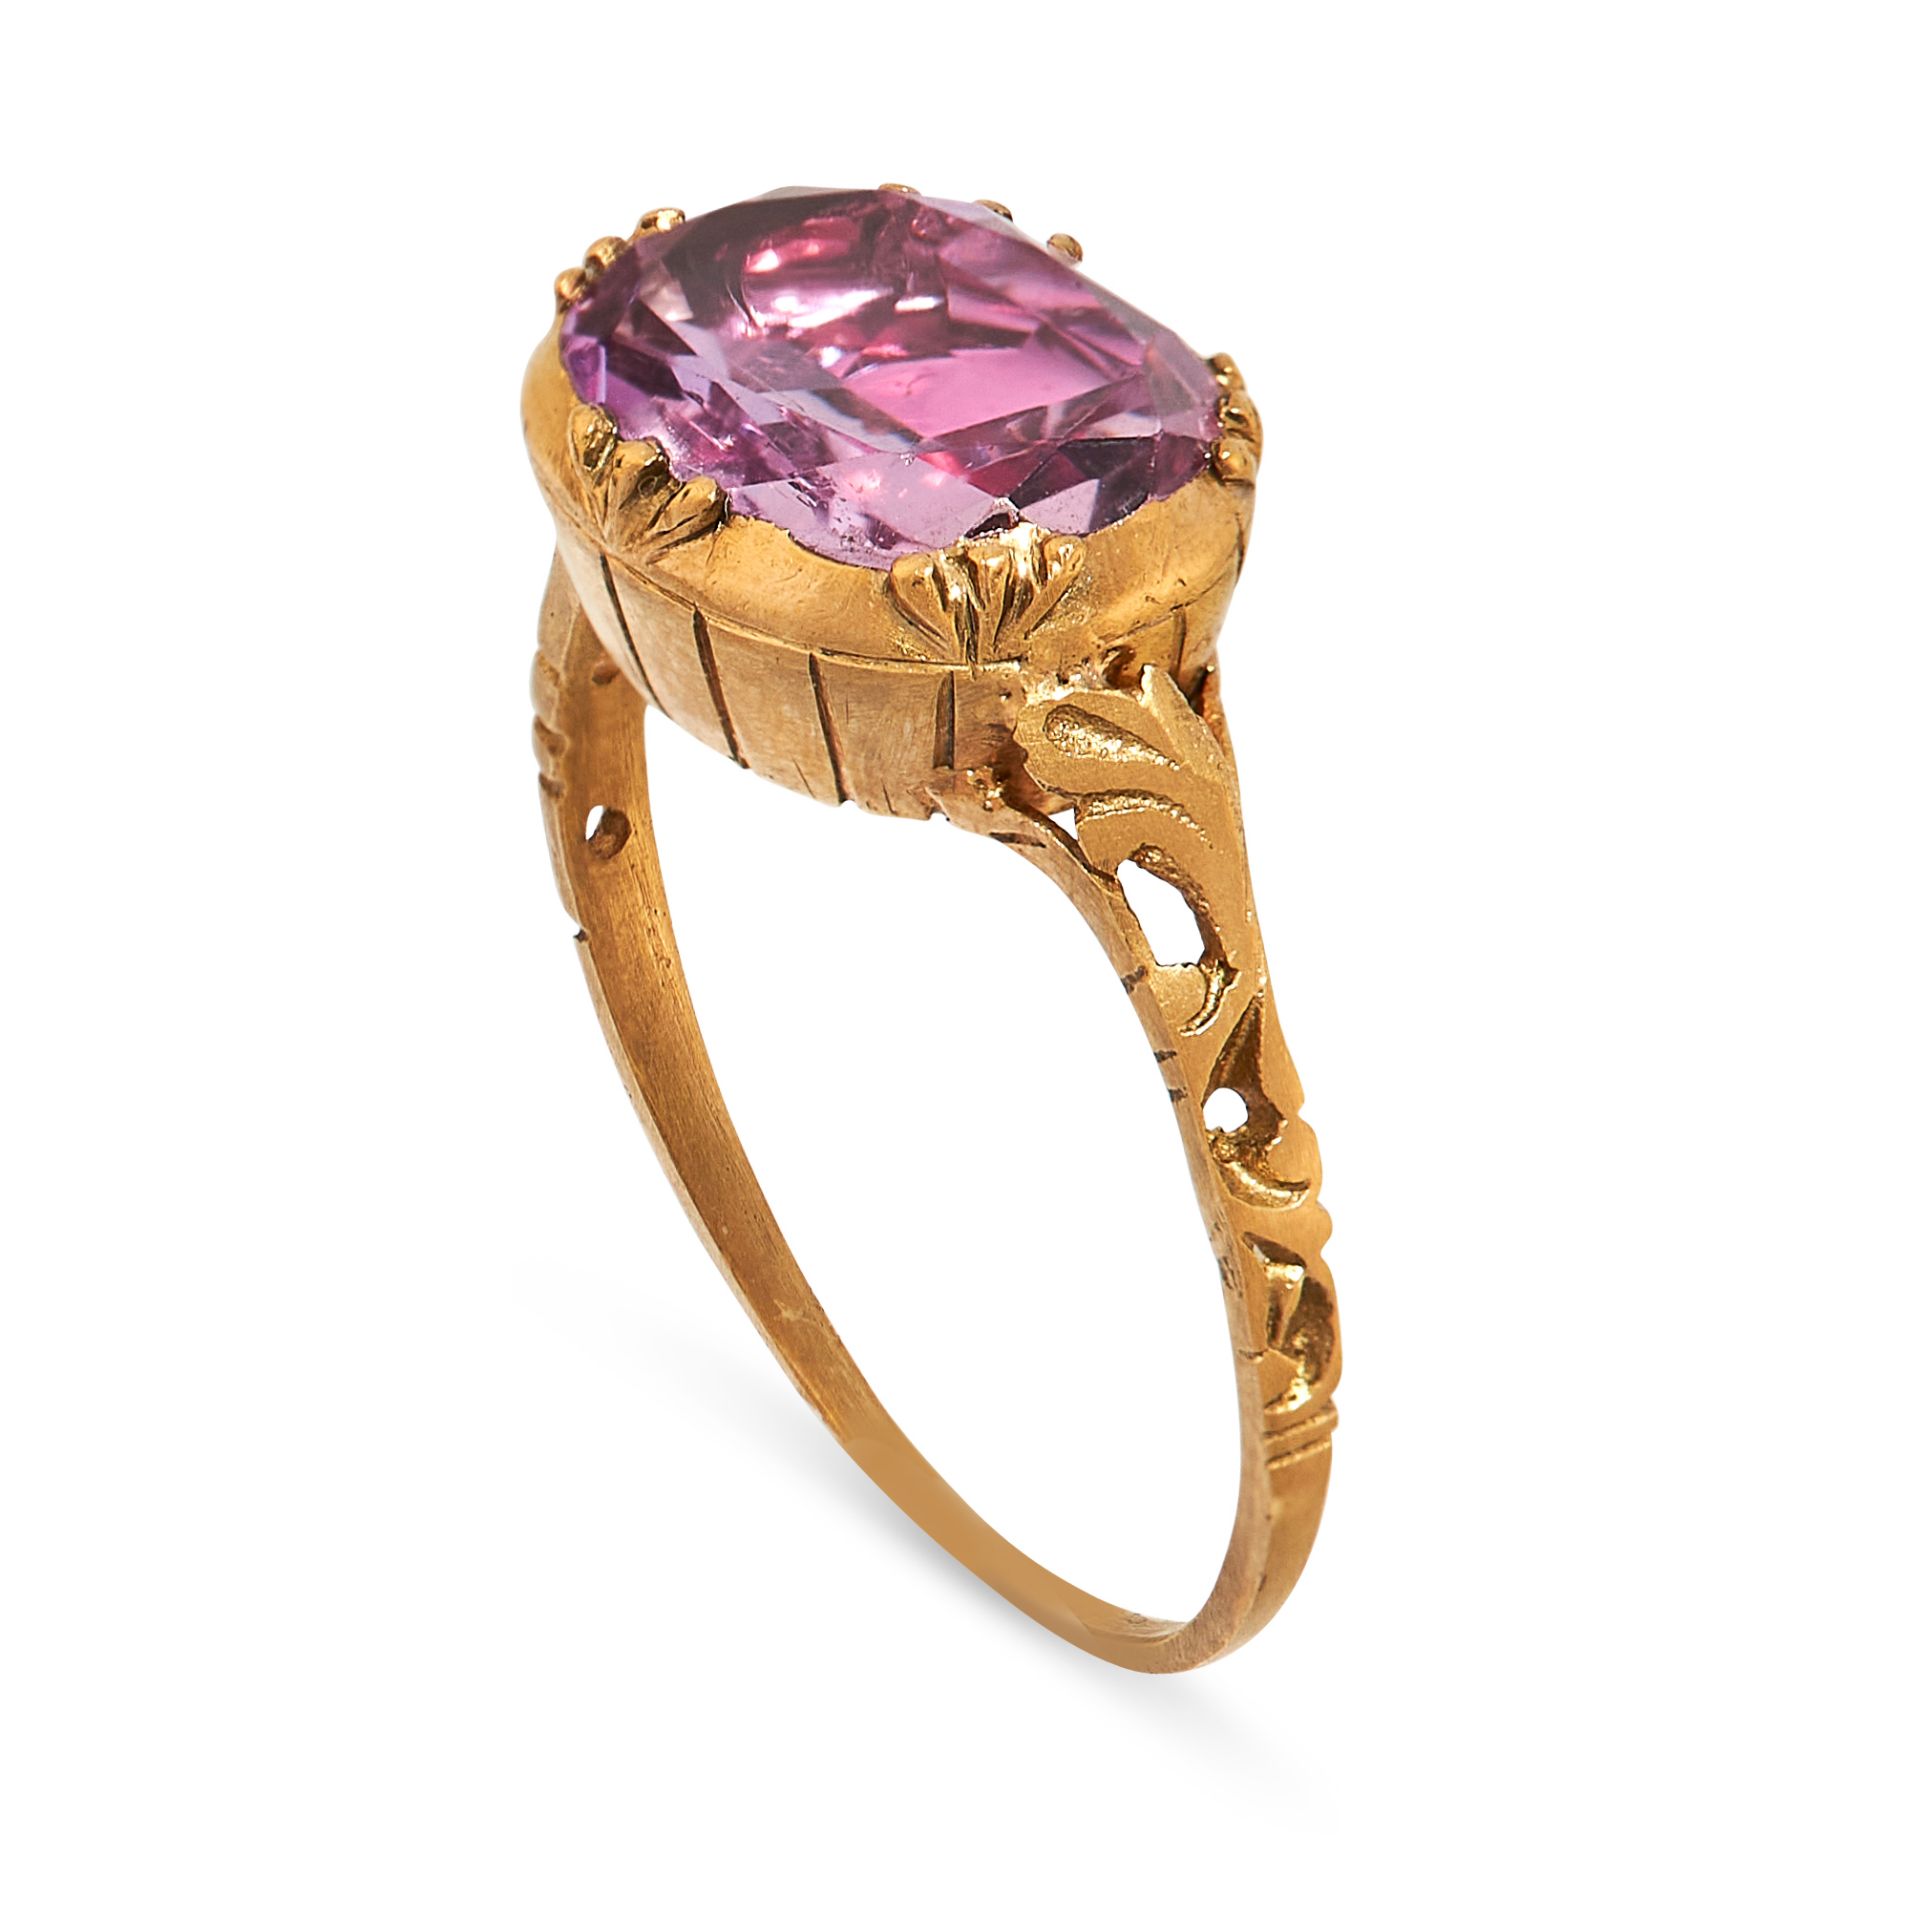 A PINK TOPAZ DRESS RING, 19TH CENTURY AND LATER in yellow gold, the ring formed of an antique - Image 2 of 2